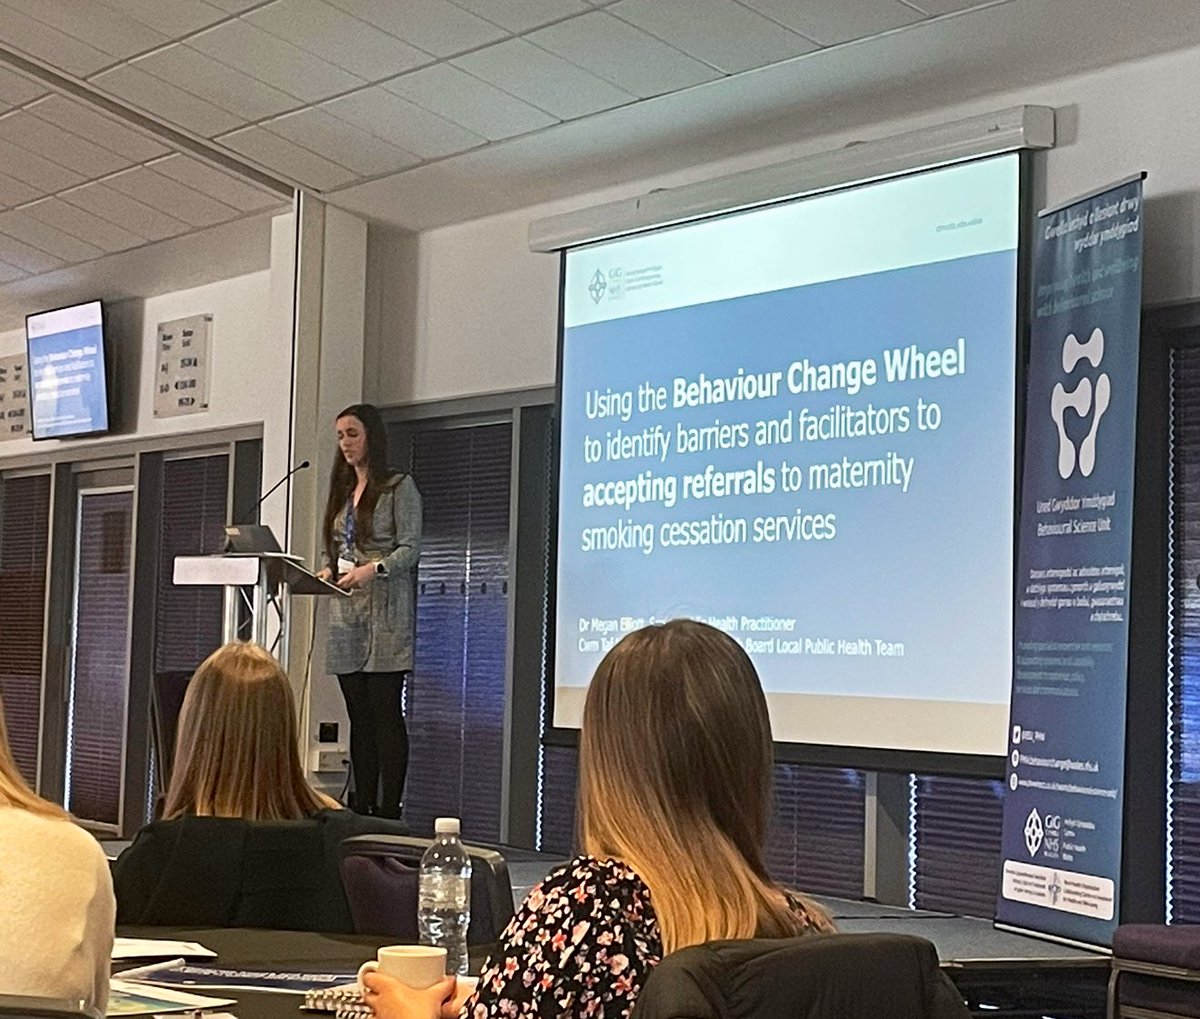 Thanks @BSU_PHW for the opportunity to share my work applying the #BehaviourChangeWheel on the issue of low acceptance of #maternity #smoking #cessation services in @CwmTafMorgannwg at the #BehaviouralScience #CommunityofPractice today!